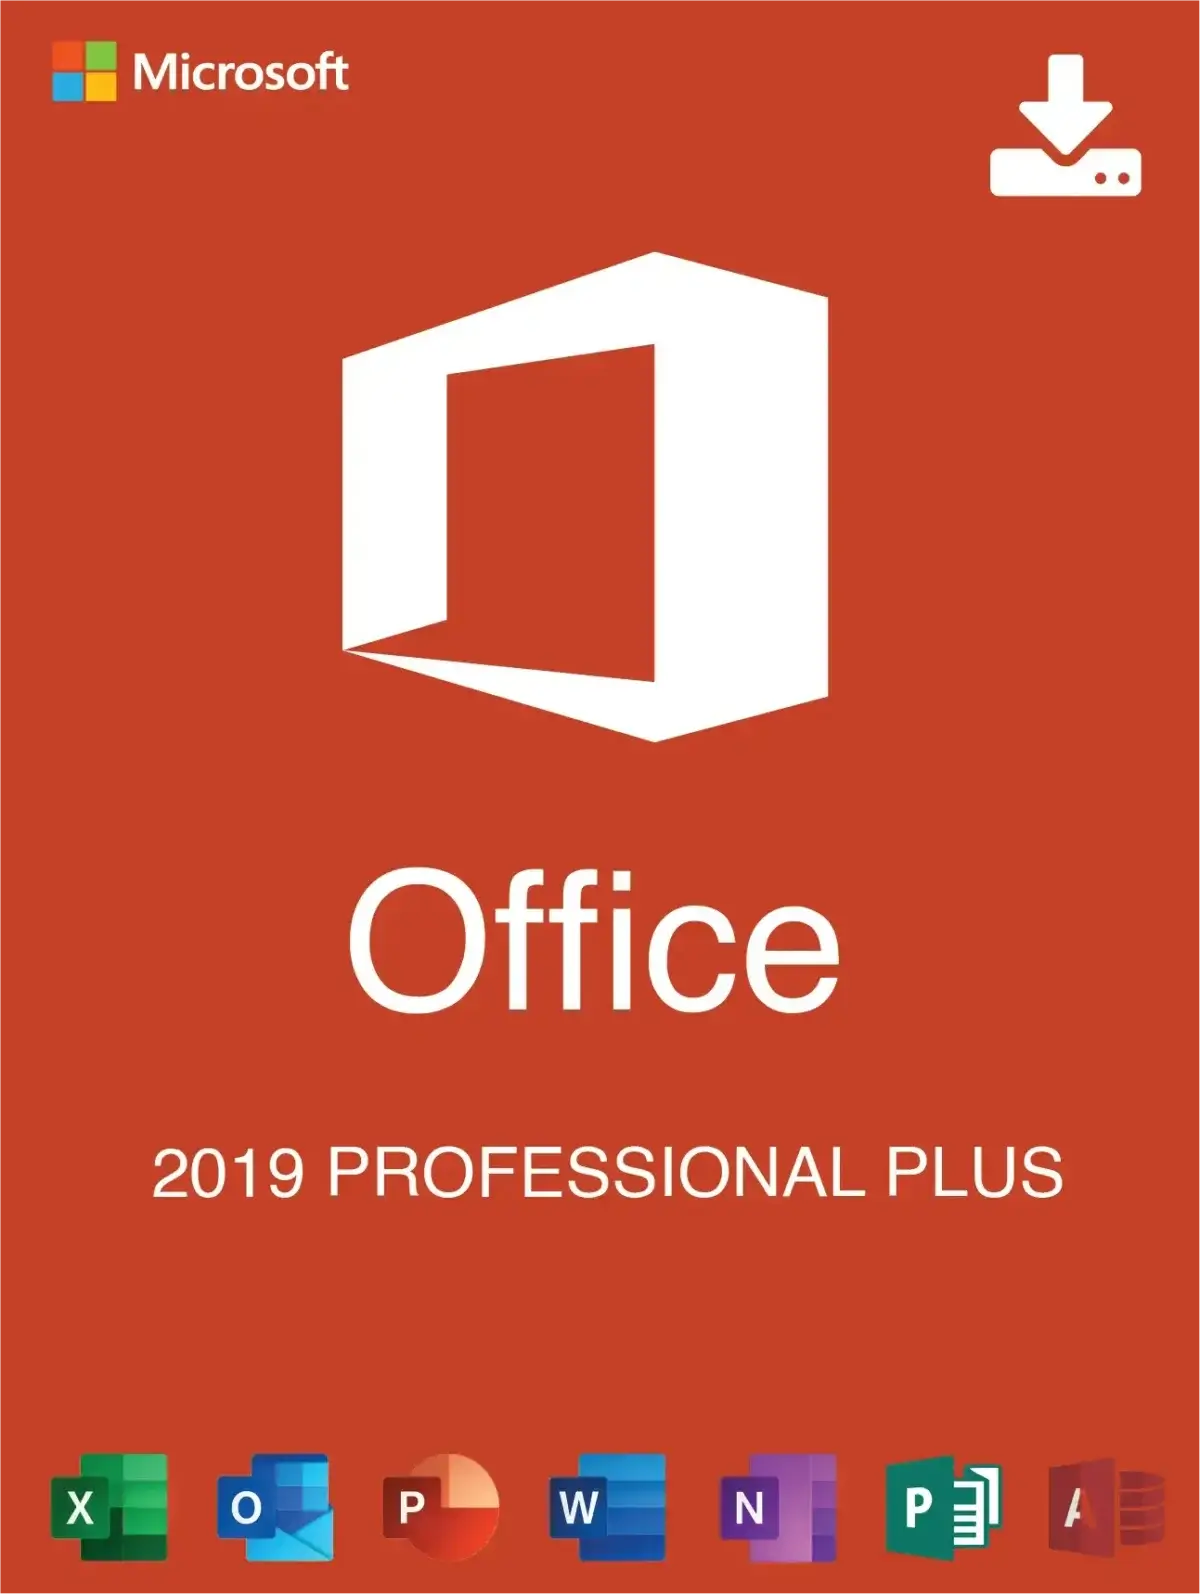 Microsoft Office Professional Plus 2019 CD Key (Digital Download) purchase microsoft 365 business purchase office 365 business purchase microsoft office business purchase office 365 subscription buy 365 business microsoft 365 purchase options microsoft 365 purchase purchase microsoft office 365 business microsoft office 365 purchase options microsoft office business one time purchase purchase office 360 microsoft 365 purchase online purchase microsoft office for ipad office 365 purchase order system office 365 license purchase purchase office 2019 professional buy word subscription purchase windows 365 purchase office 365 family purchase microsoft 365 family microsoft office buying options buy microsoft office subscription microsoft office 365 purchase online purchase microsoft office 2019 professional plus i want to purchase microsoft office windows 365 purchase microsoft office suite purchase o365 purchase buy domain through microsoft buy microsoft 365 family purchase microsoft office 365 home purchase o365 license office 365 purchase price microsoft office suite buy purchase outlook for business buy office 365 personal buy license office 365 purchase office 2019 home and business purchase microsoft office 365 family purchase office 365 personal purchase microsoft 365 personal purchase office 2016 license microsoft 365 buy purchase microsoft excel and word microsoft 365 family buy microsoft 365 personal purchase buy microsoft suite for mac purchase microsoft office for macbook pro purchase microsoft office for macbook purchase microsoft office for macbook air ms office 2016 purchase buy office 2019 home and business purchase microsoft office 365 for mac buy microsoft suite ms office 2016 online purchase purchase excel and word for mac microsoft suite purchase purchase ms office 2019 purchase microsoft office professional buy microsoft package options for purchasing microsoft office purchase office 365 license purchase word and excel for mac buying office 365 online microsoft word buy outright buy ms office suite purchase microsoft 365 for mac microsoft office purchase microsoft office perpetual license price purchase microsoft office 2019 for mac microsoft office personal buy buy office 10 buy o365 licenses purchase microsoft office for windows 10 microsoft domain purchase office 365 purchase purchase microsoft office 2019 purchase microsoft office 2021 buy office 2019 professional one time word purchase purchase microsoft office for pc purchase microsoft word for macbook air office 2016 purchase visio purchase ms visio purchase purchase microsoft office student discount purchase microsoft excel for mac purchase microsoft word and excel buy exchange online buy word and excel for mac purchase ms office for mac purchase microsoft for mac ms office 365 purchase purchase microsoft word for mac purchase office 365 home buy microsoft office home and student microsoft word online purchase buy microsoft office for macbook air purchase microsoft 365 home microsoft office license purchase